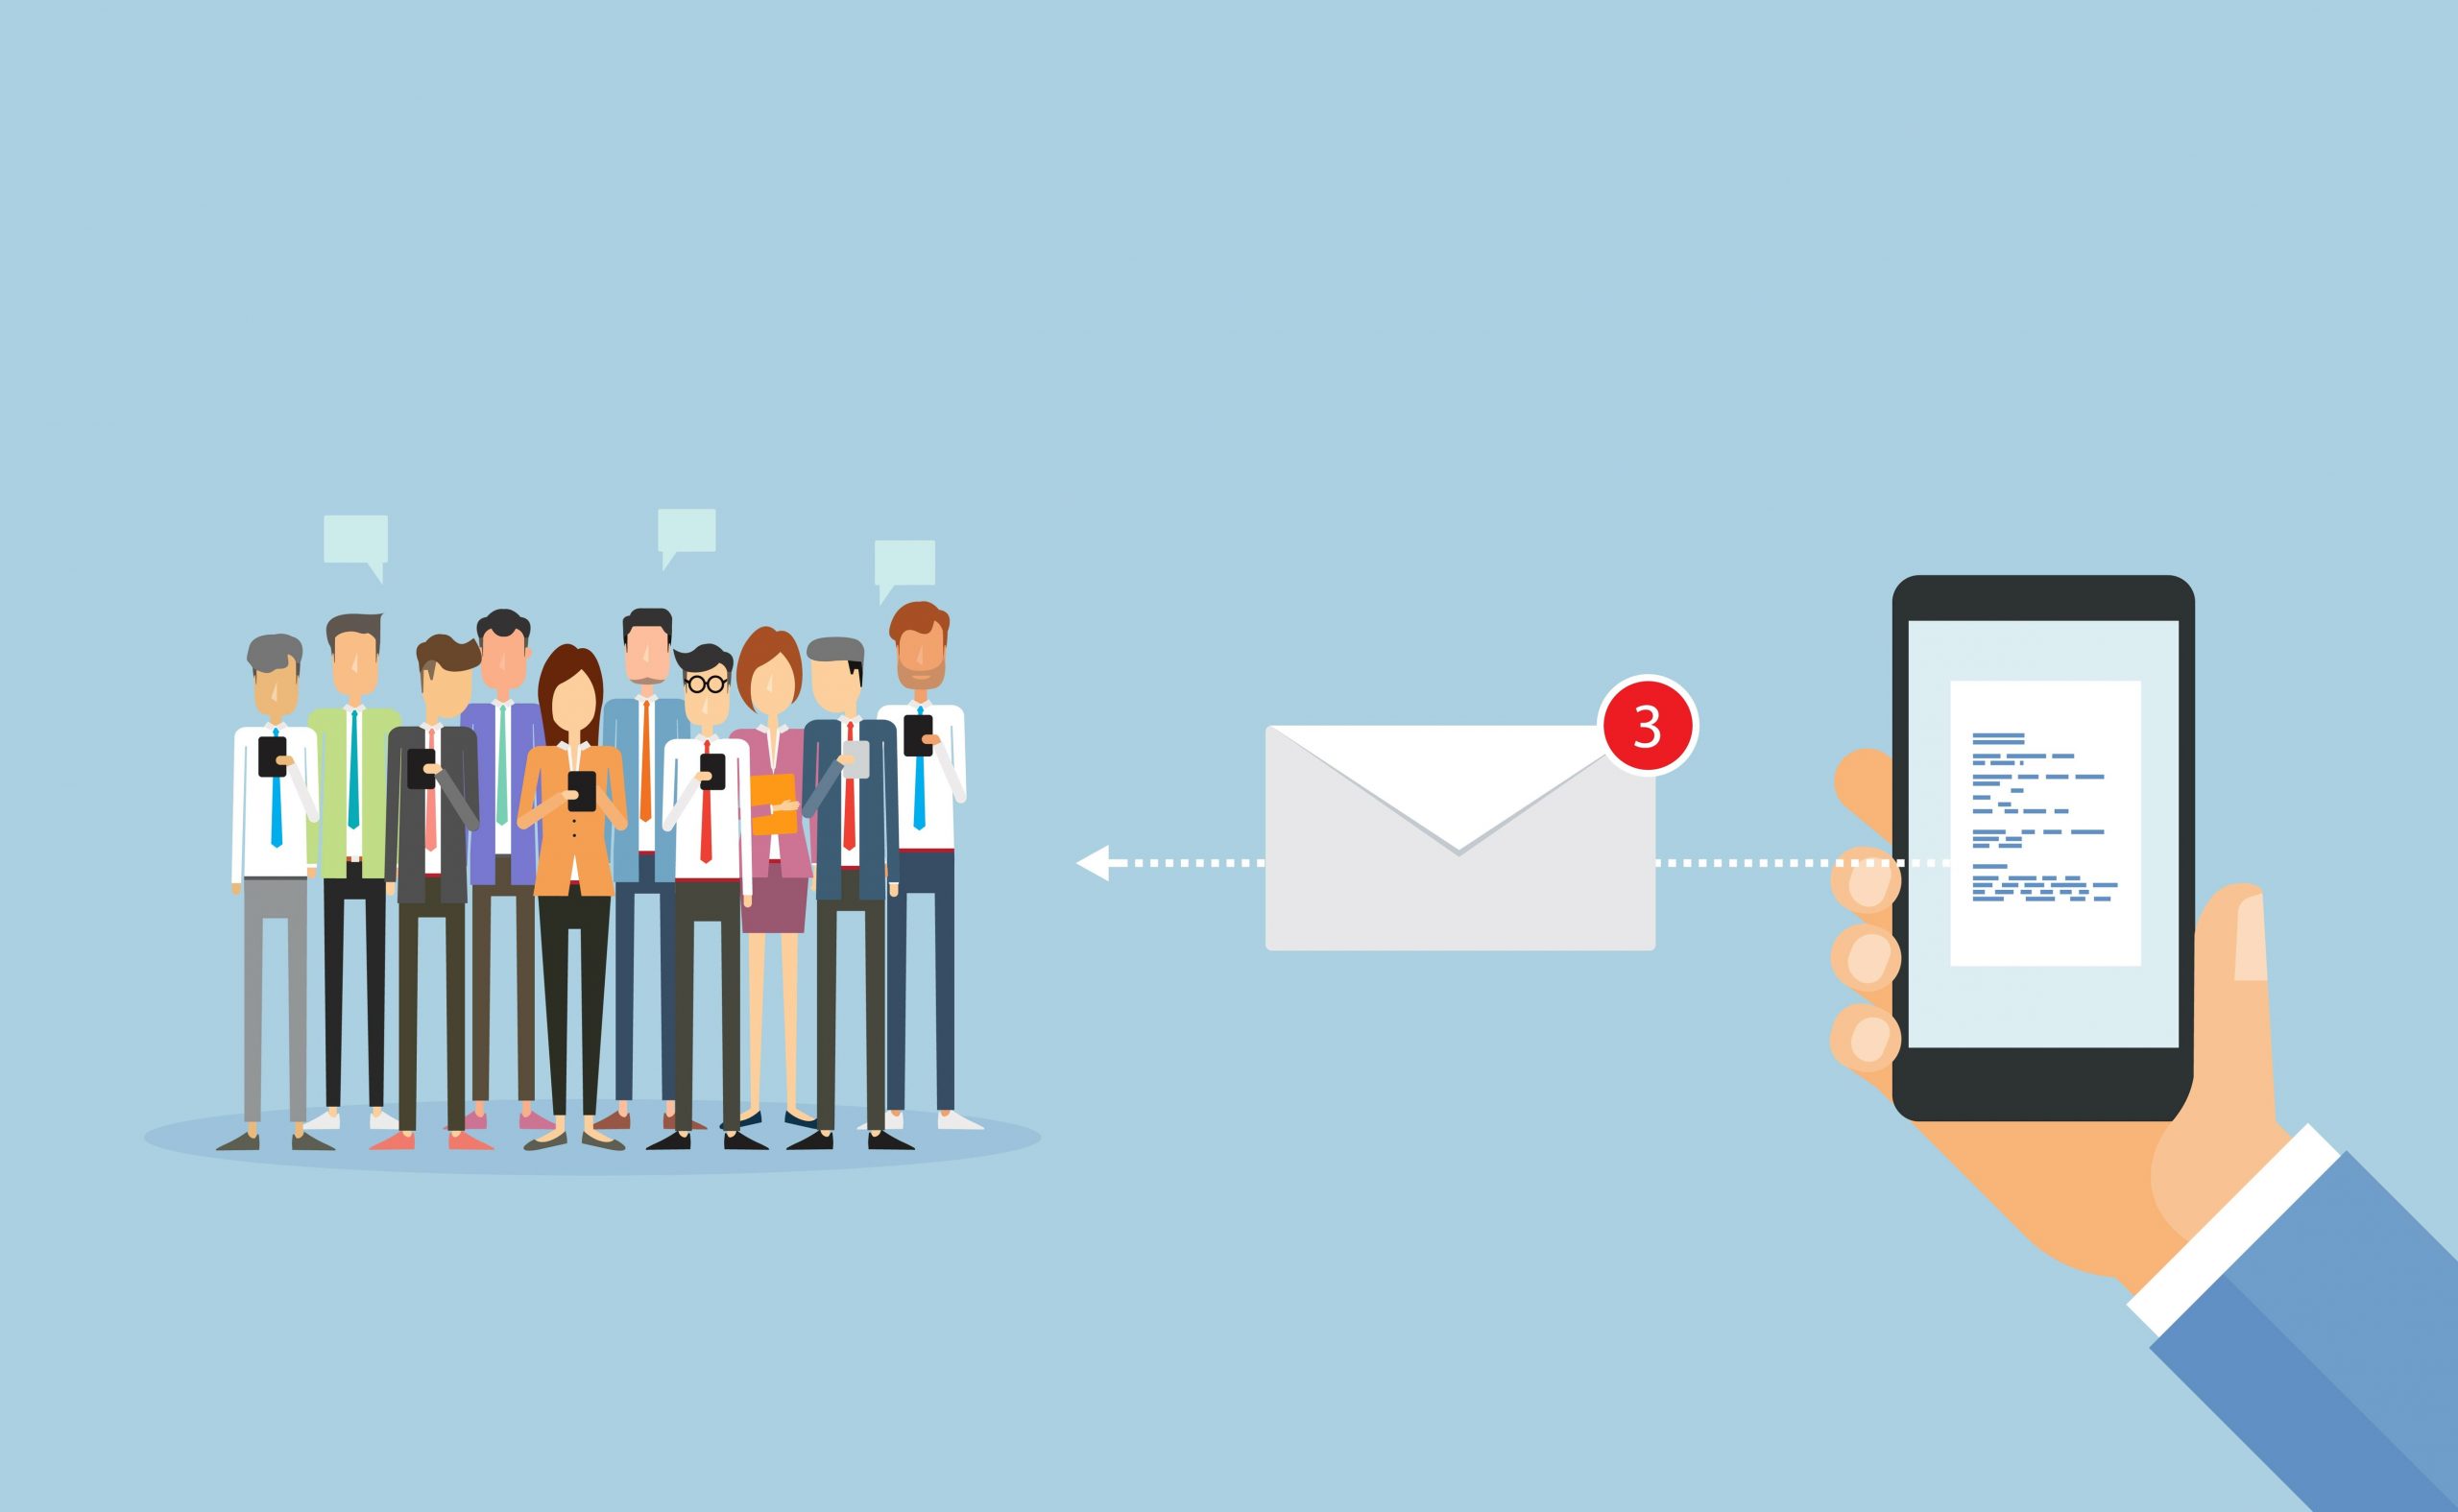 What are the benefits of an SMS marketing campaign?